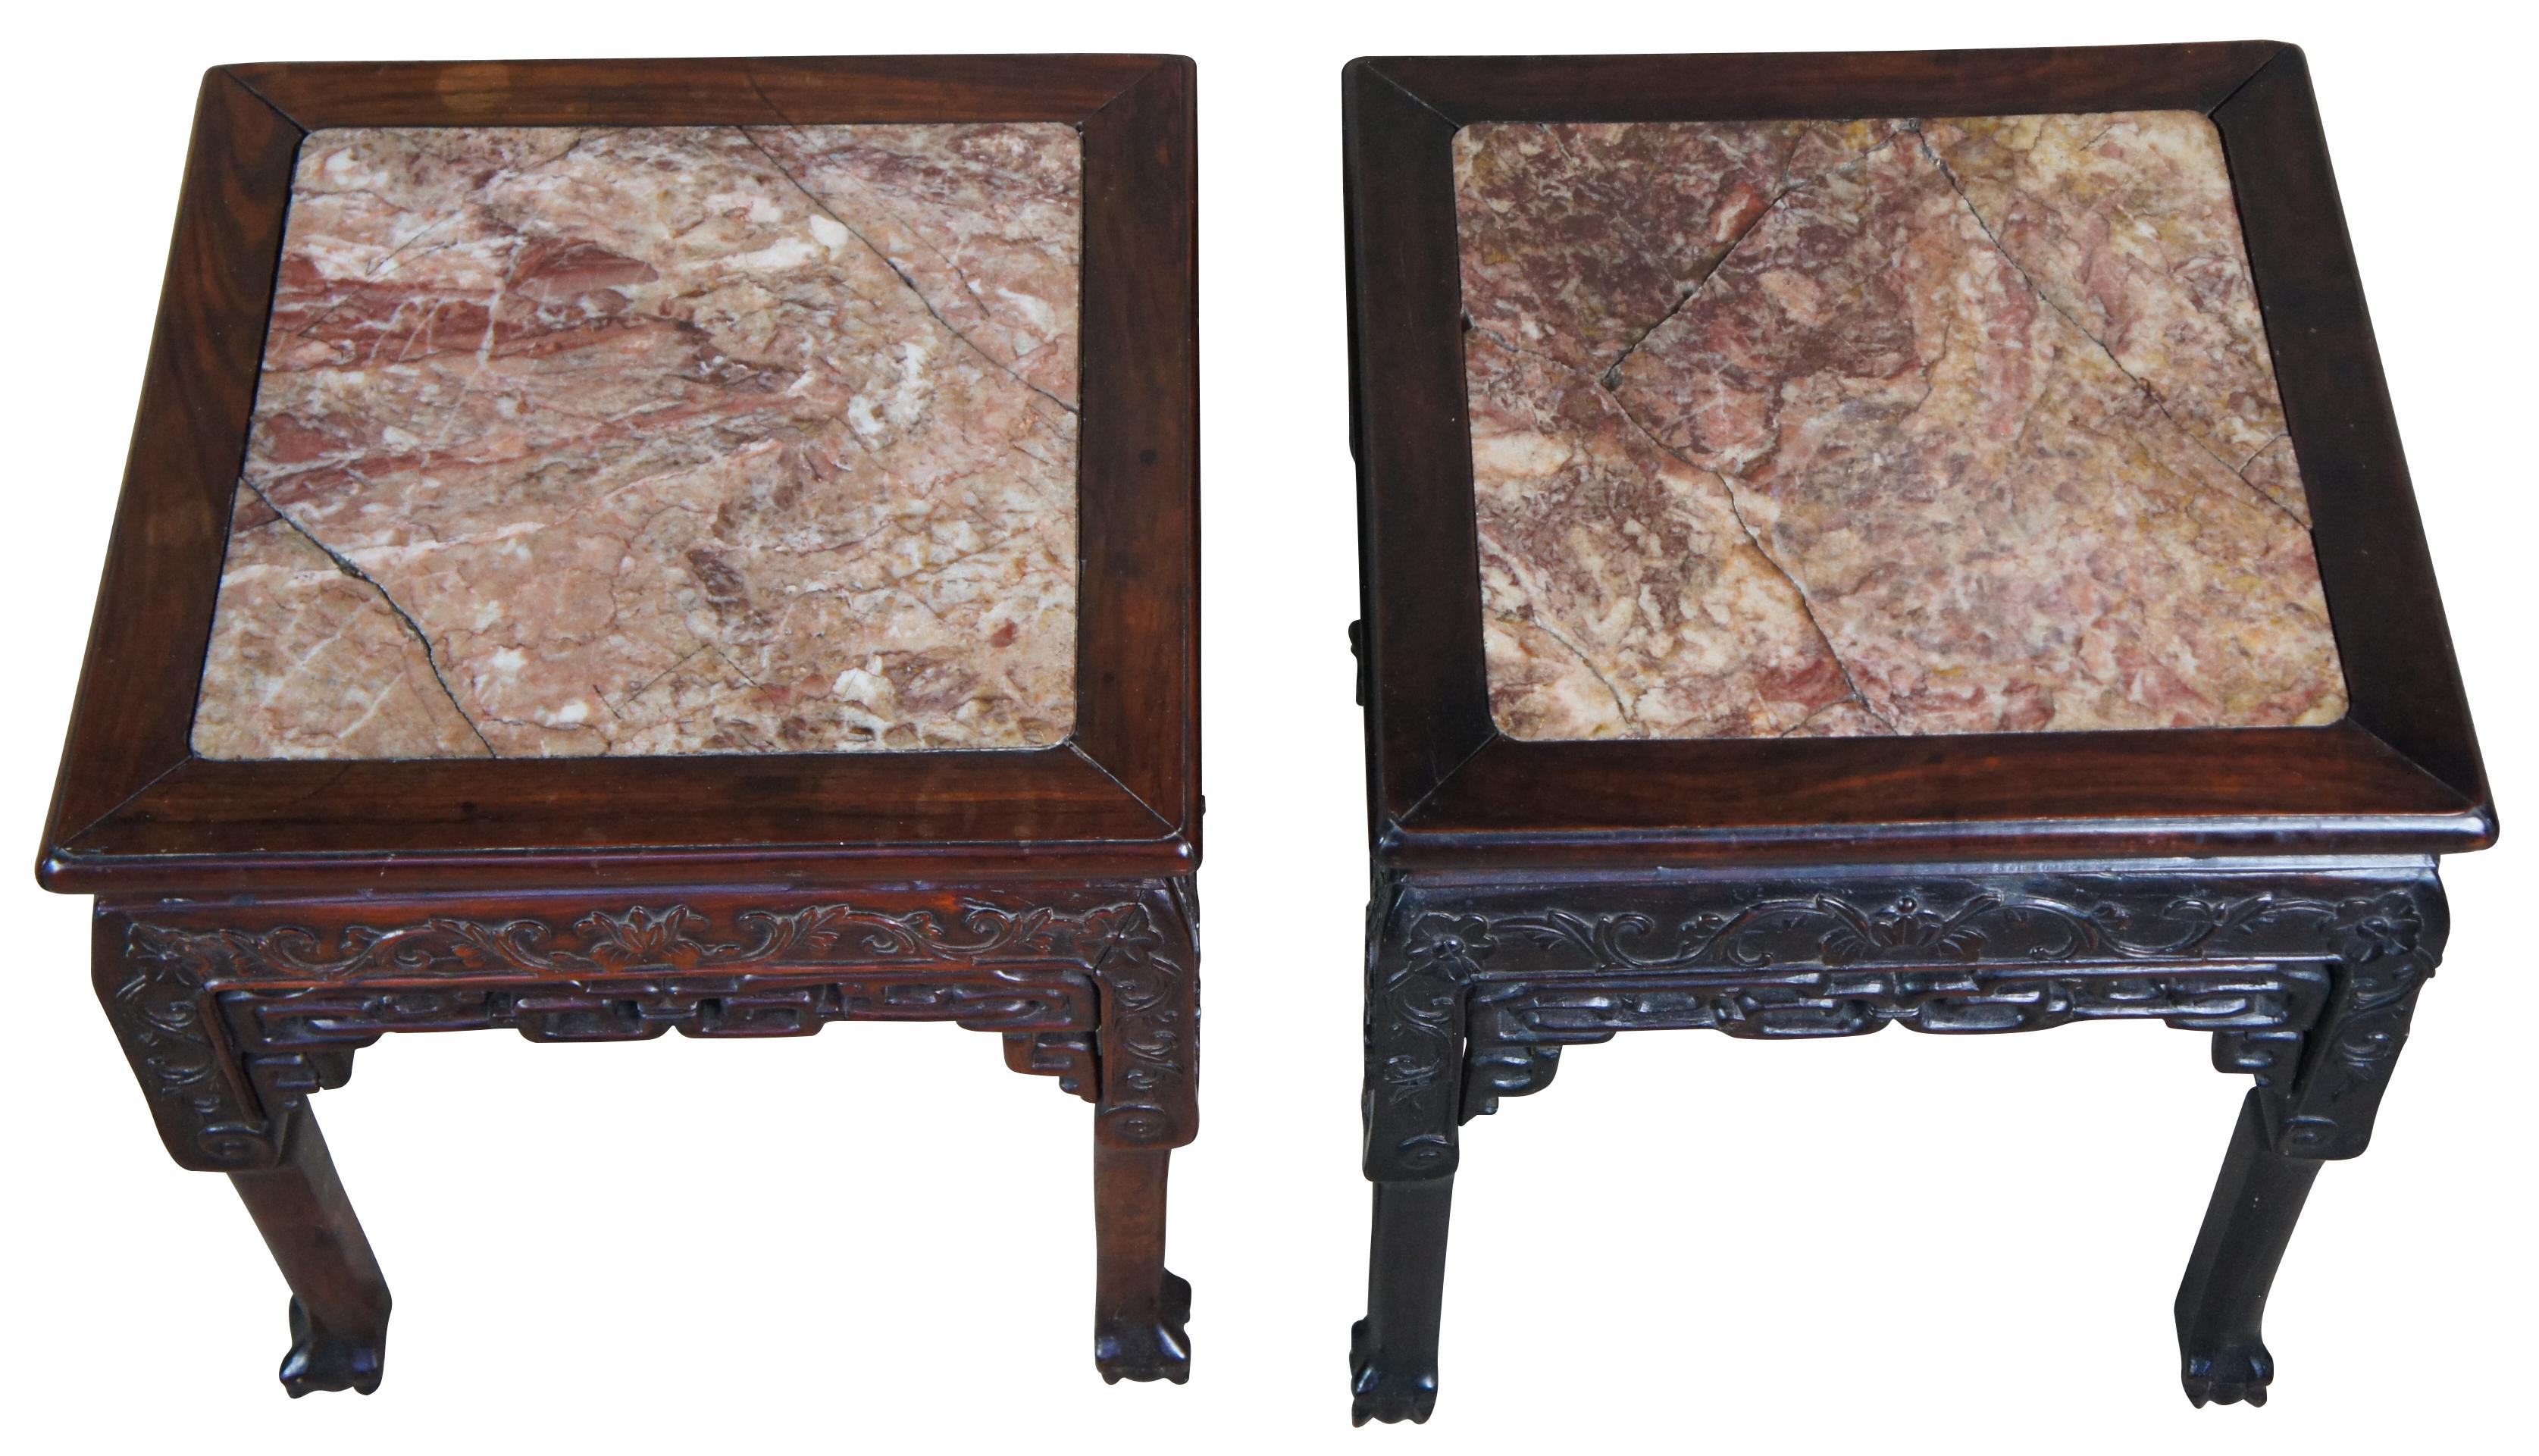 Pair of antique 19th century Chinese tables or plant stands. Made of carved rosewood featuring square form with floral and reticulated designs, pink marble, and ball and claw feet.
    